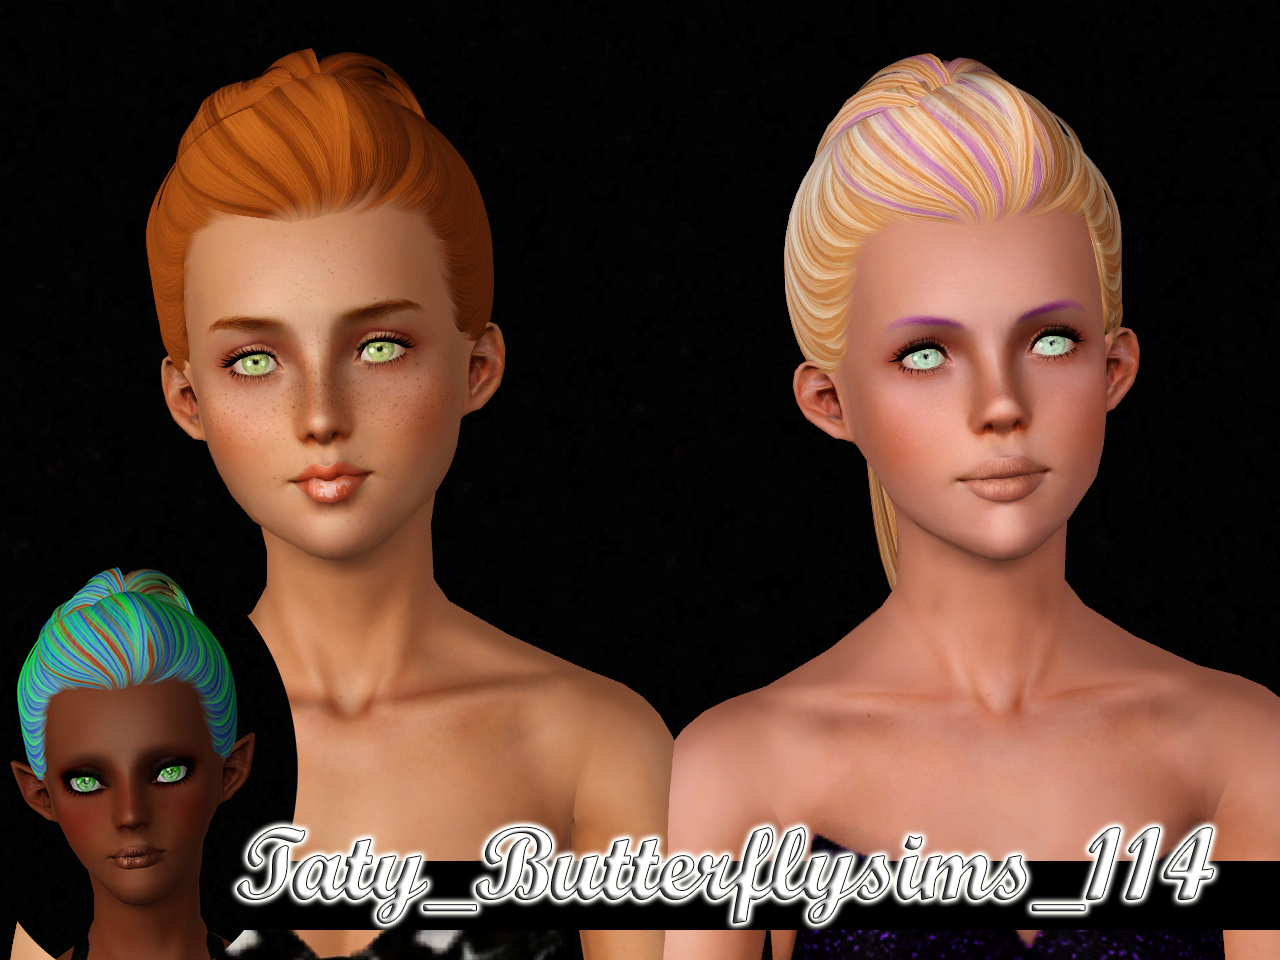 Butterflysims 114 hairstyle retextured by Taty for Sims 3.